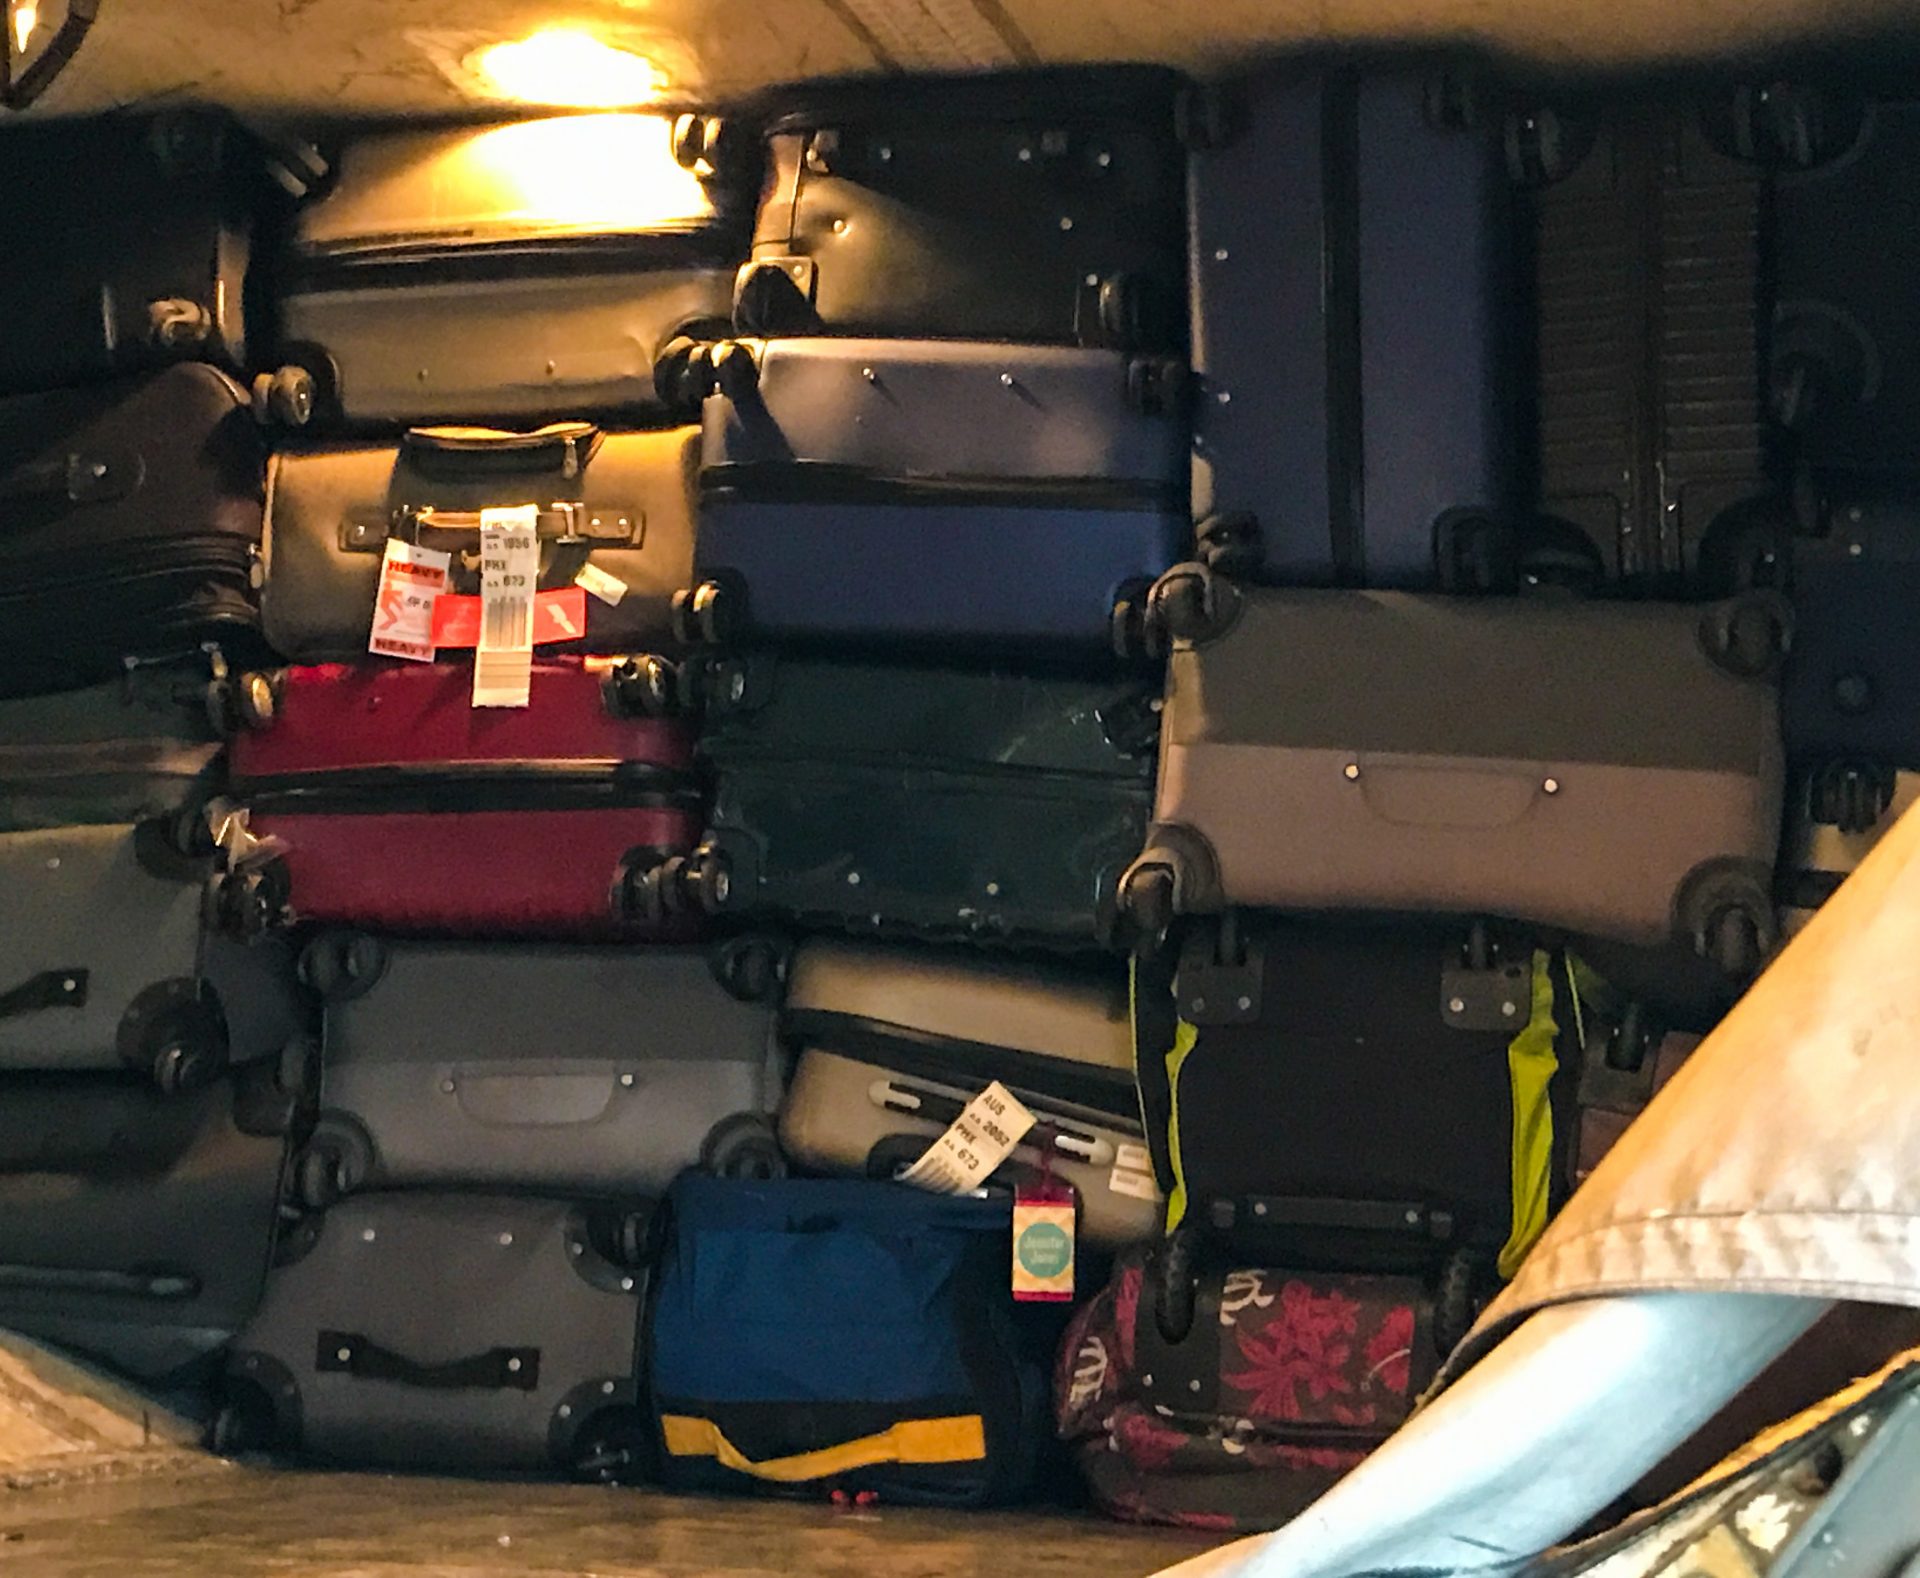 Load-Of-Luggage